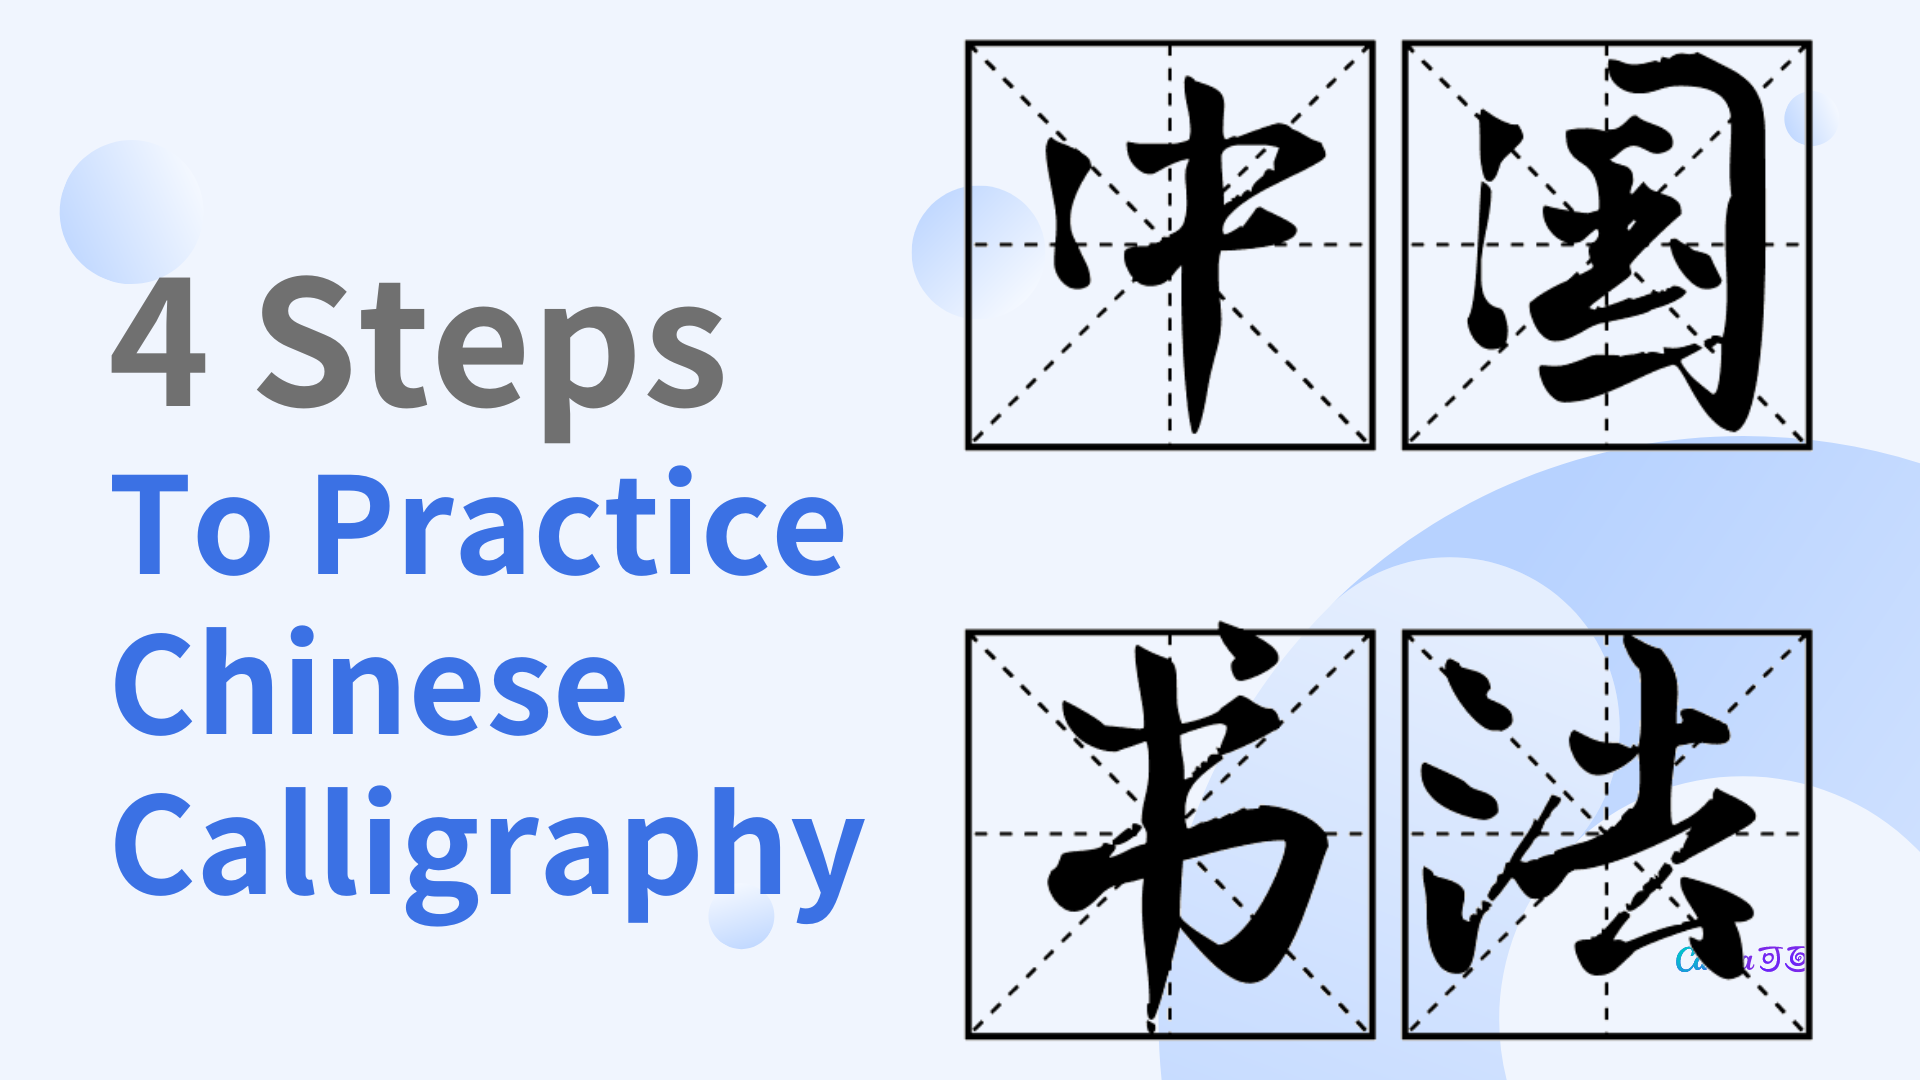 Four Steps to Practice Chinese Calligraphy